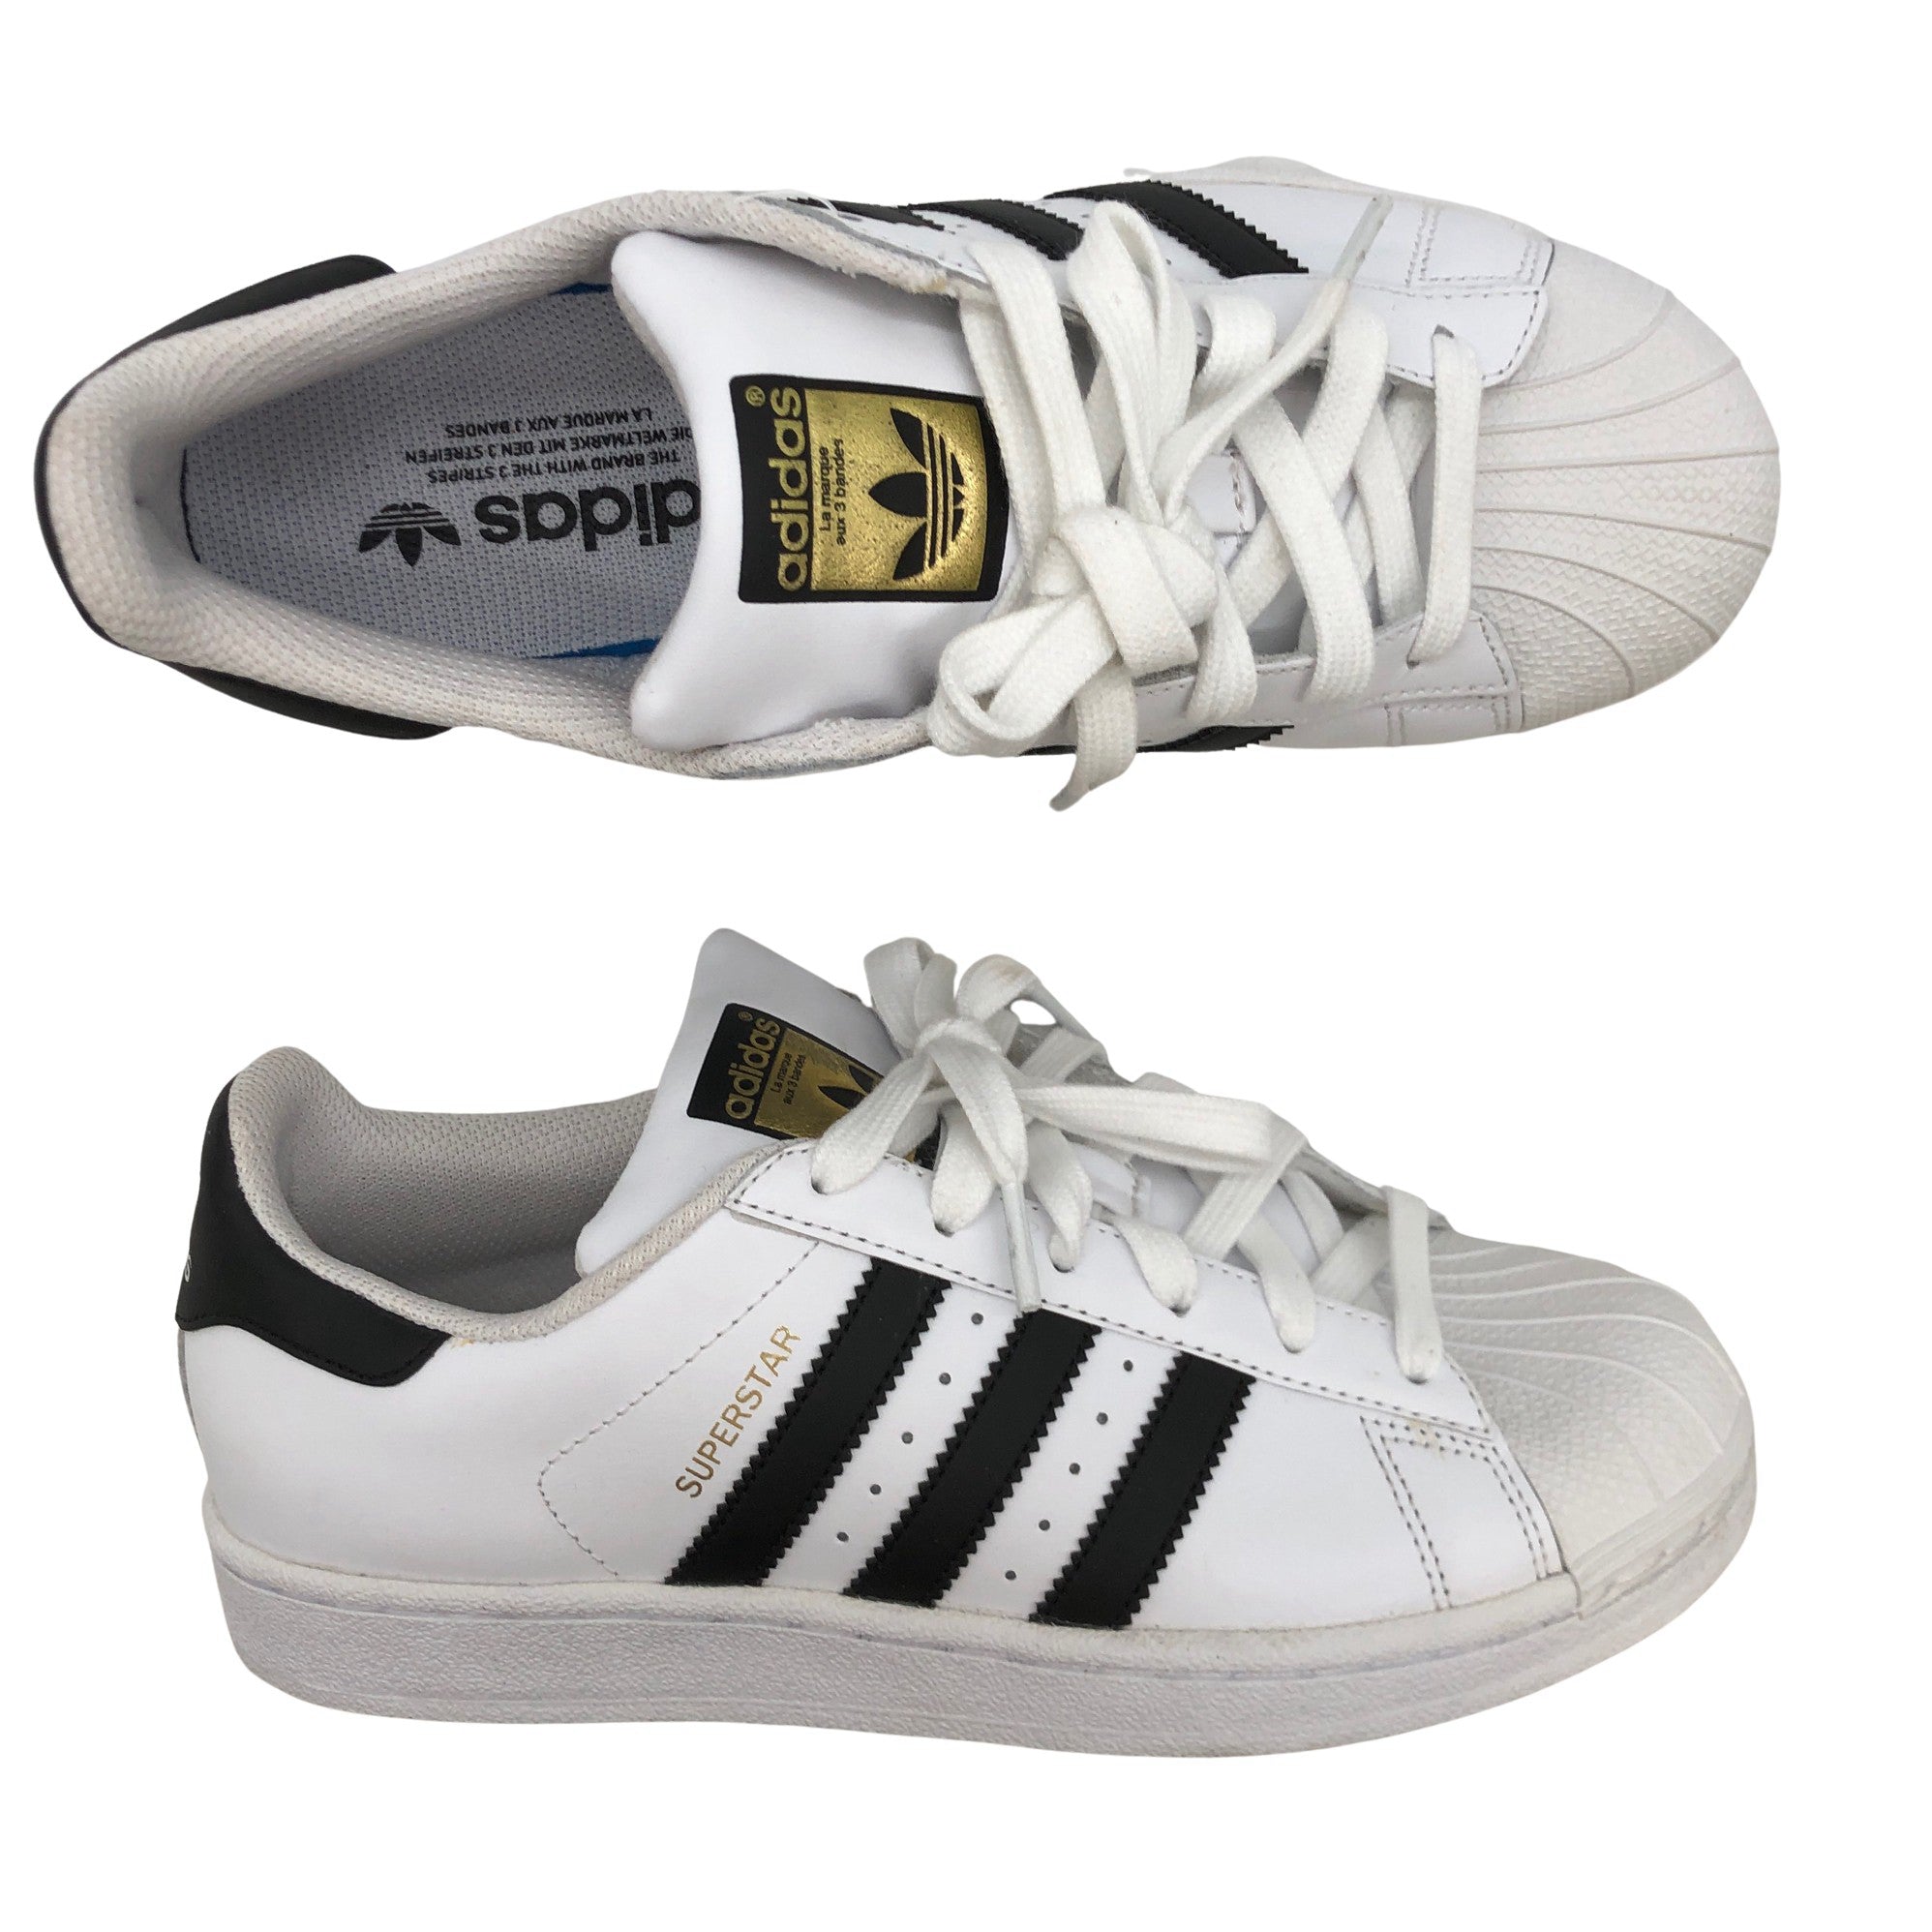 Adidas Casual sneakers, size 39 (White) | Emmy